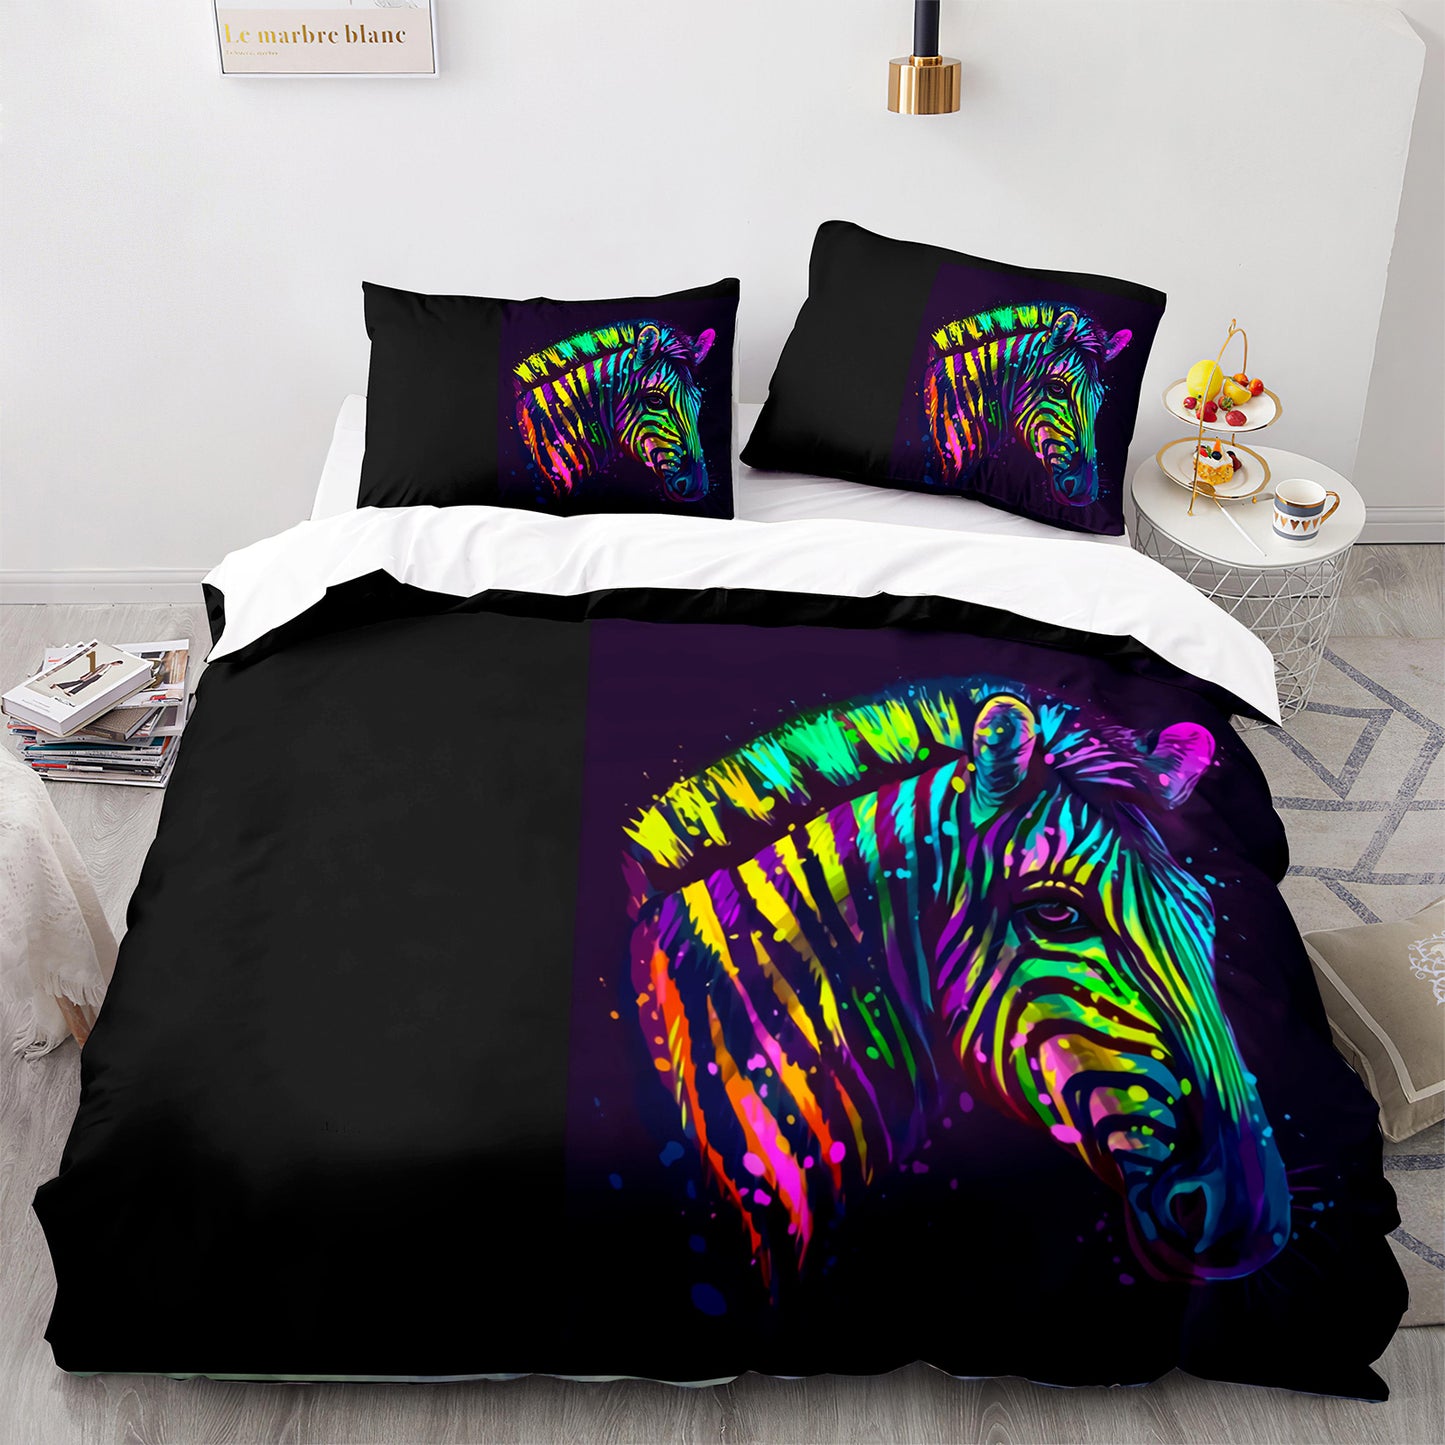 Cutom Duvet Cover Set Pattern Chic Comforter Cover King Size for Teens Adults Bedding Set with Pillowcases  M1091